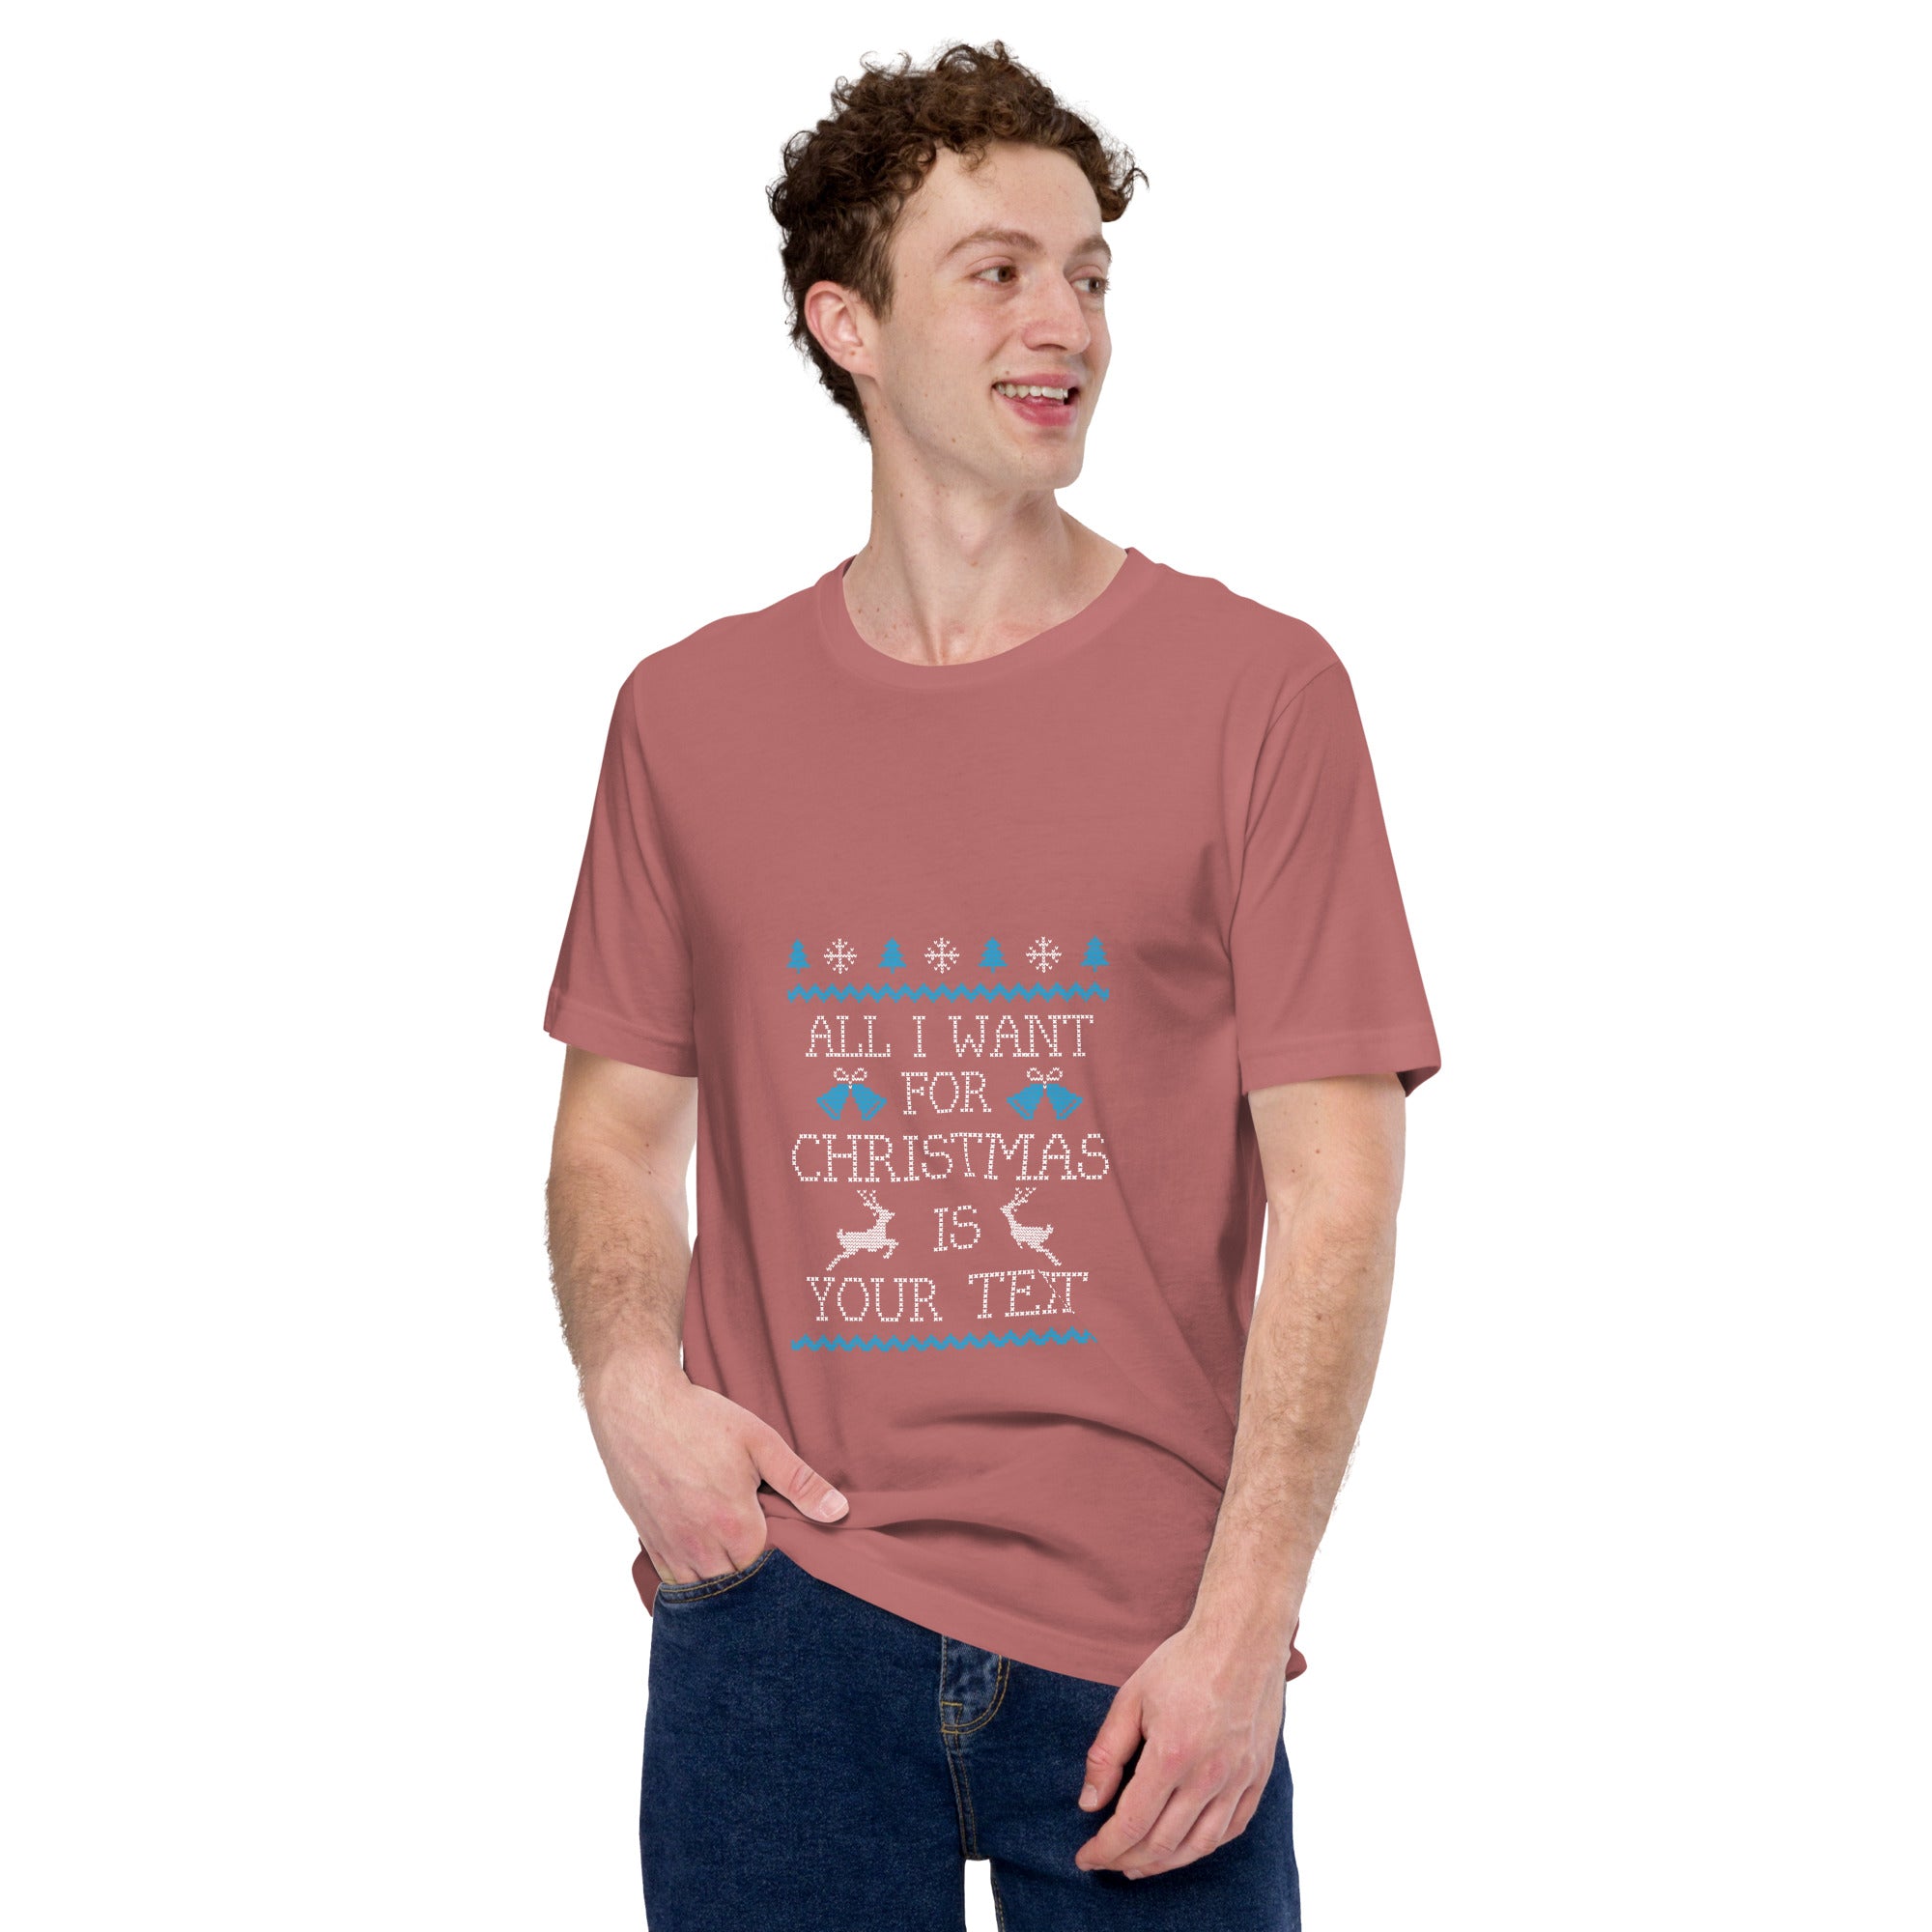 All I Want For Christmas Is Your Test Unisex t-shirt